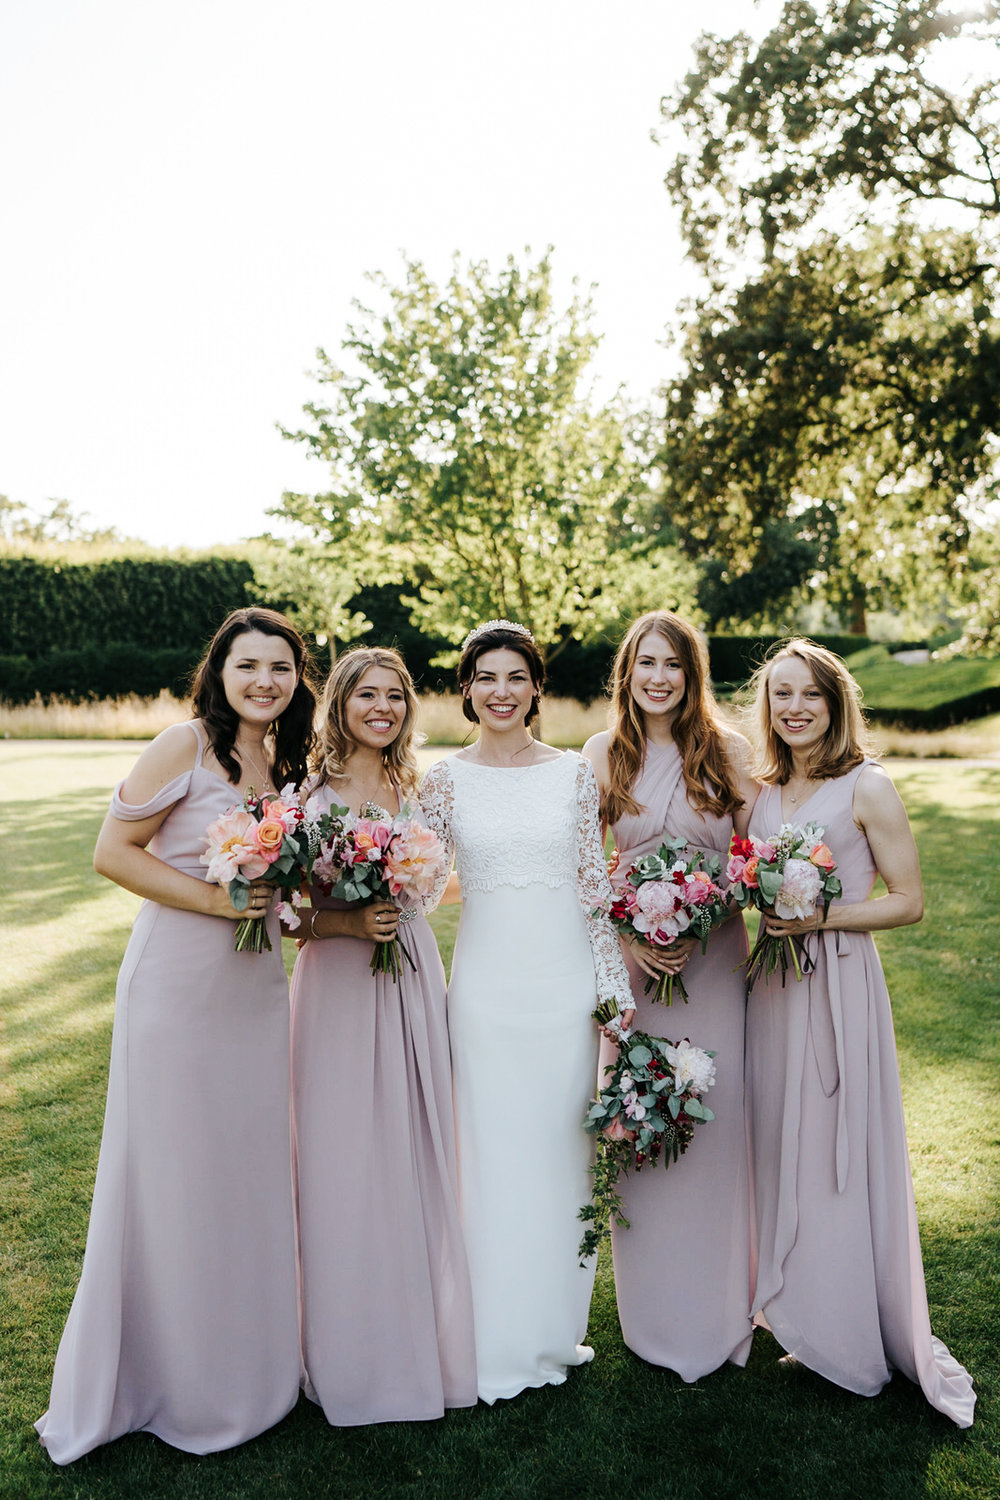  Bride and bridesmaids stand in beautiful light as they look at camera for a posed photograph 